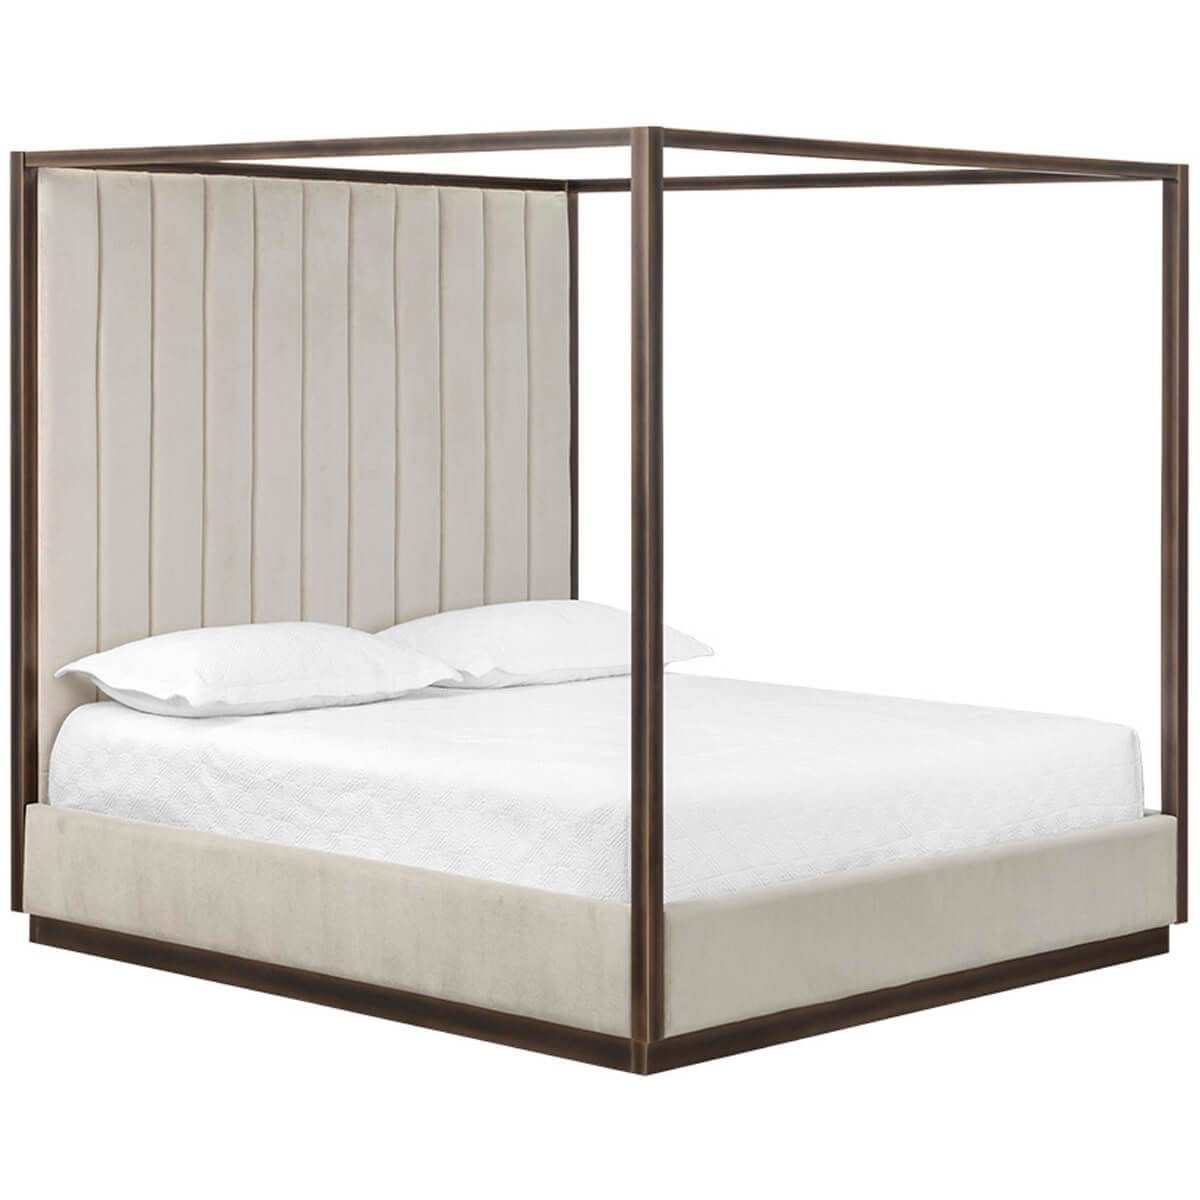 Image of Casette Canopy King Bed, Piccolo Prosecco